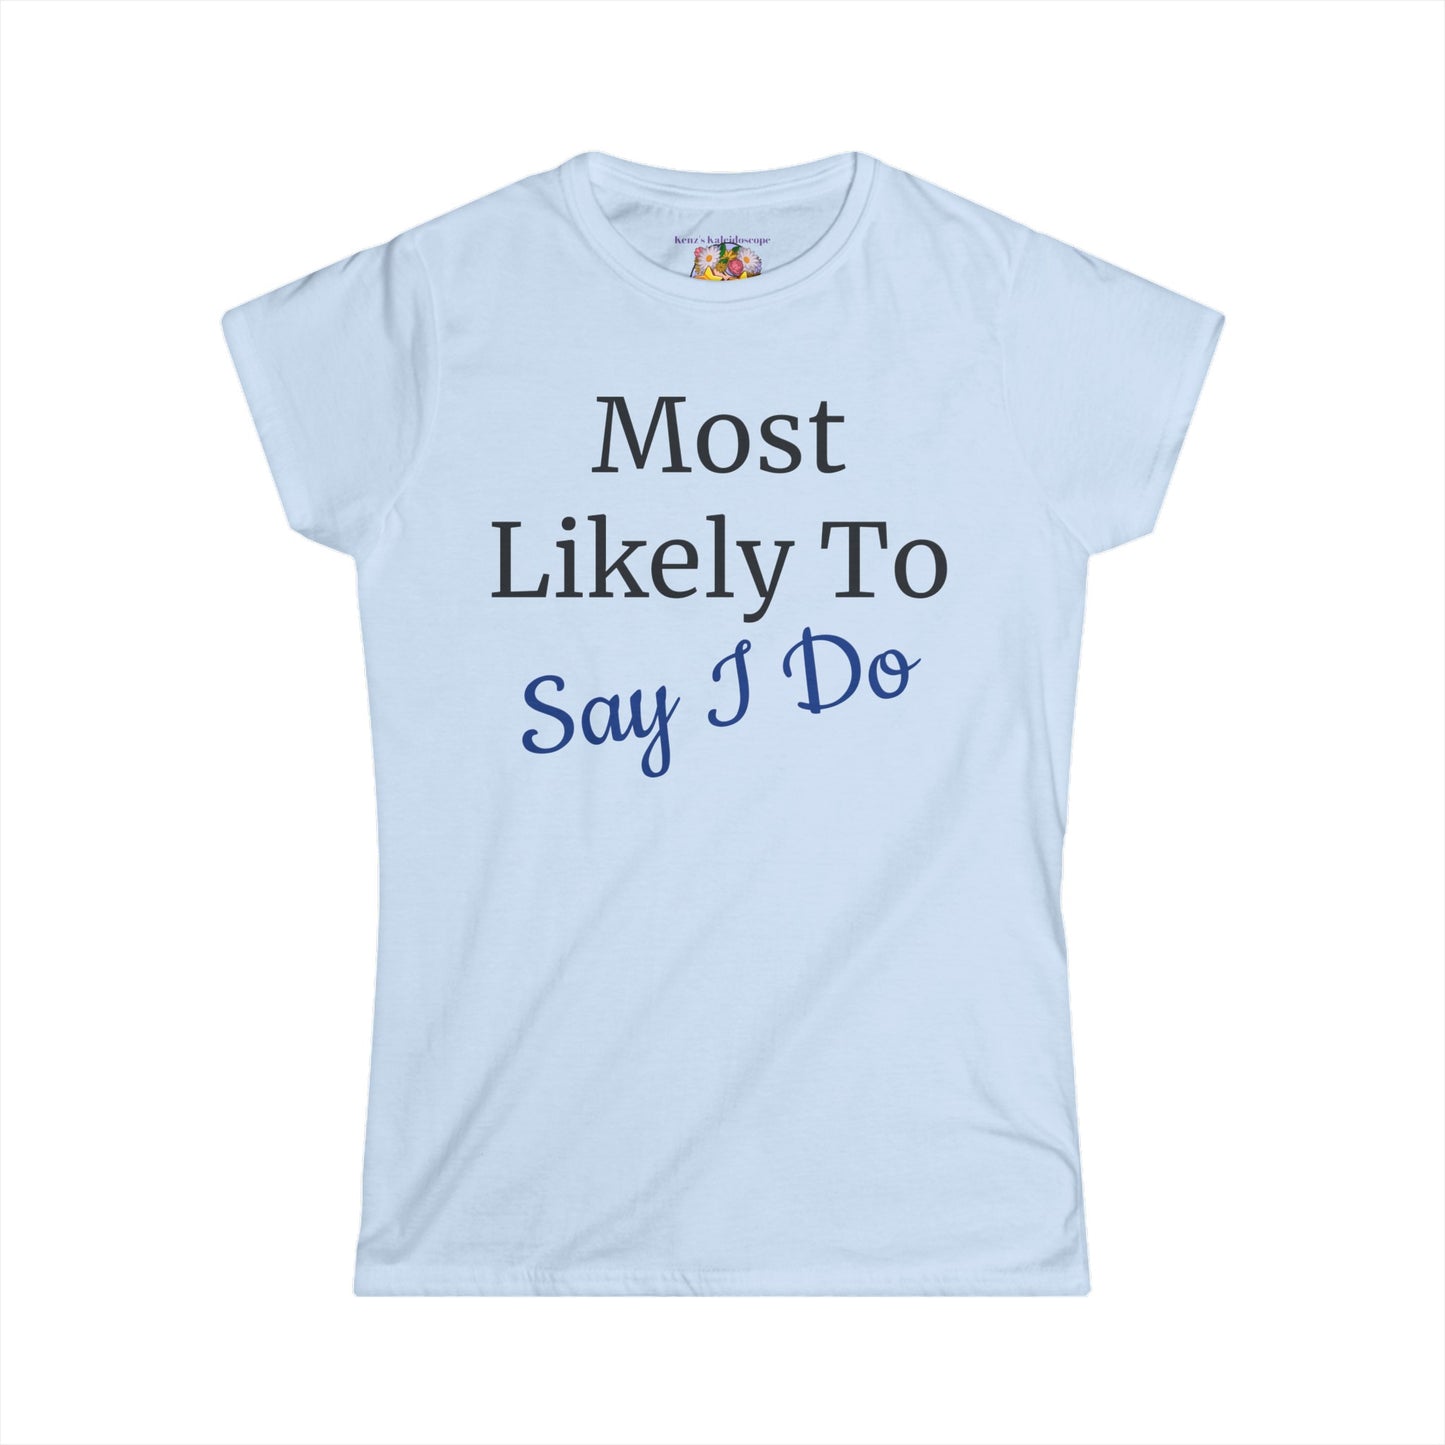 Bachelorette Party, Most Likely To, S-2XL, Women's Softstyle Tee